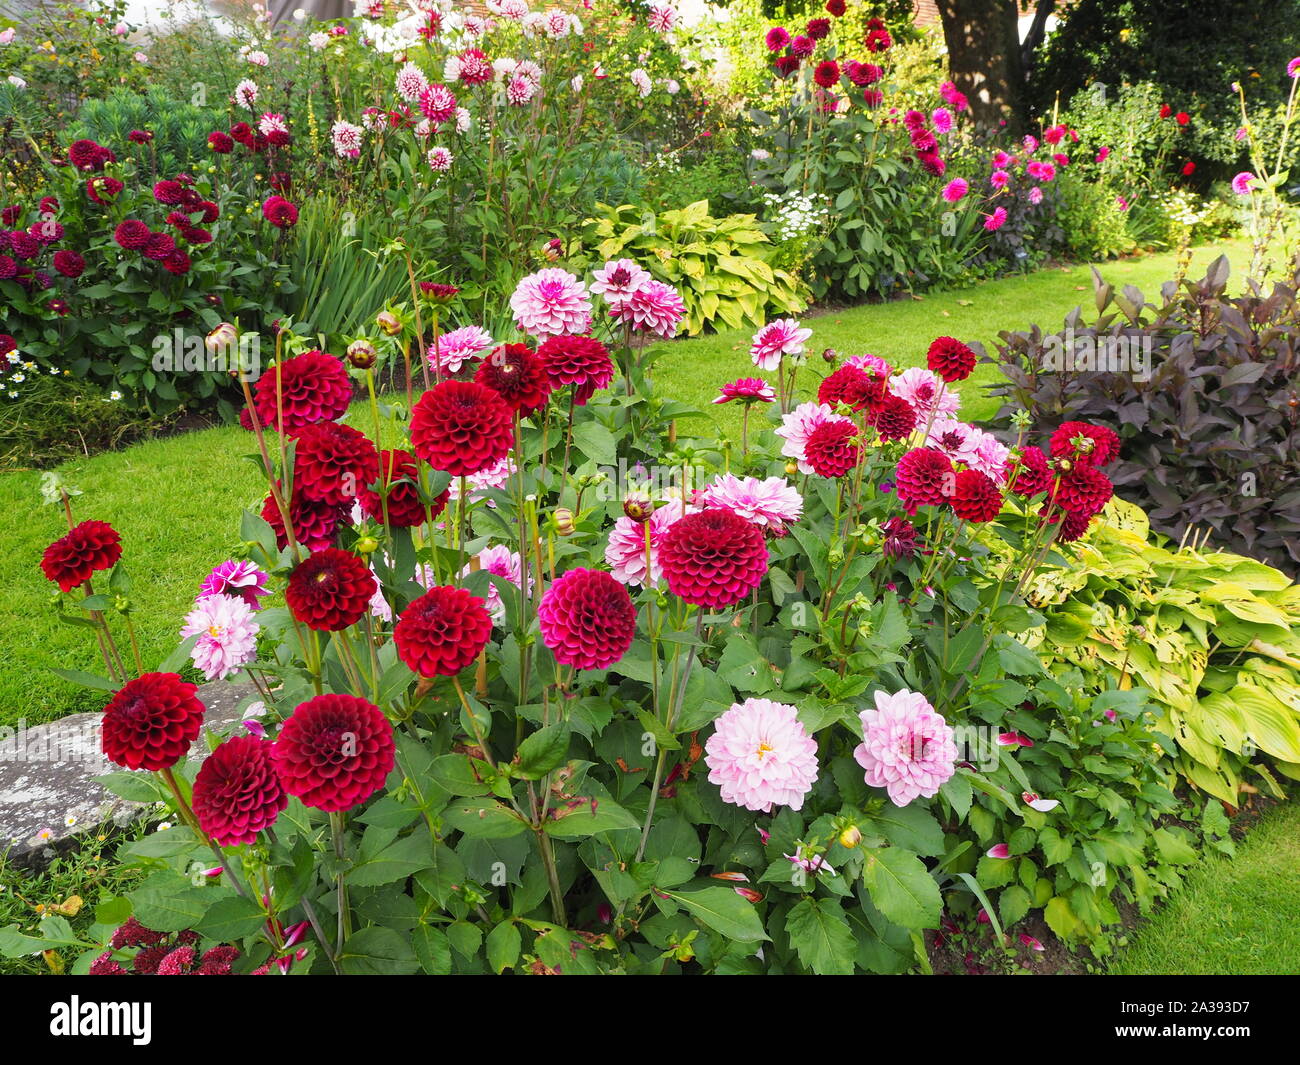 Chenies Manor sunken garden dahlias in shades of pink, carmine, red and mauve with reddish leaves, a variety of green foliage and grassy paths Stock Photo